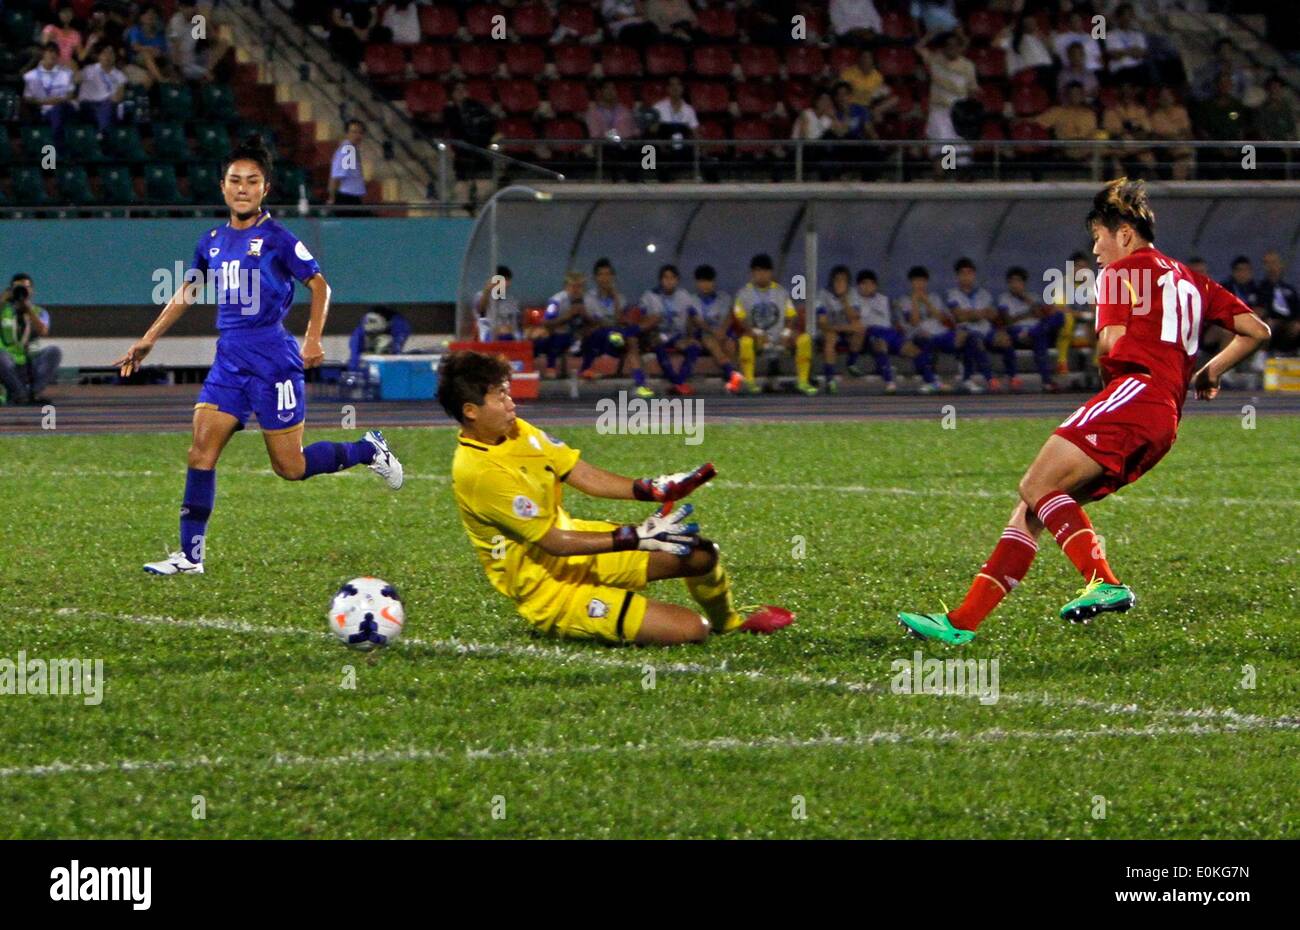 Ho Chi Minh City, Vietnam. 15th May, 2014. Li Ying (R) of China competes during the 2014 AFC Women's Asian Cup against Thailand at Thong Nhat Stadium in Ho Chi Minh city, Vietnam, May 15, 2014. China beat Thailand 7-0 © Nguyen Le Huyen/Xinhua/Alamy Live News Stock Photo